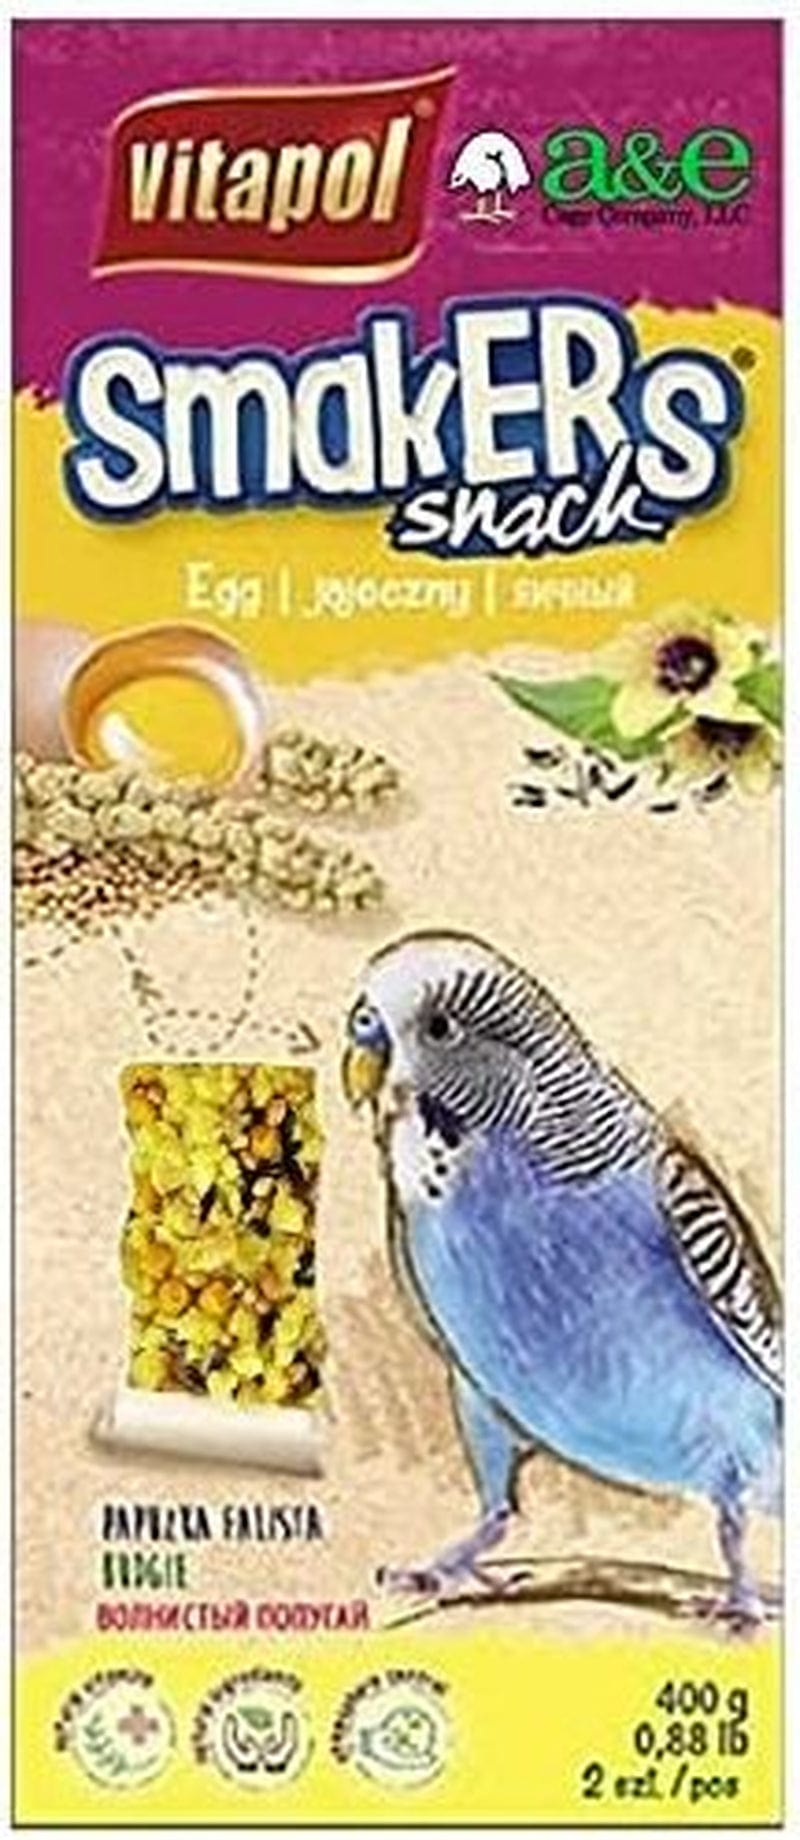 A&E Cage Company Smakers Parakeet Egg Treat Sticks 2 Count Pack of 4